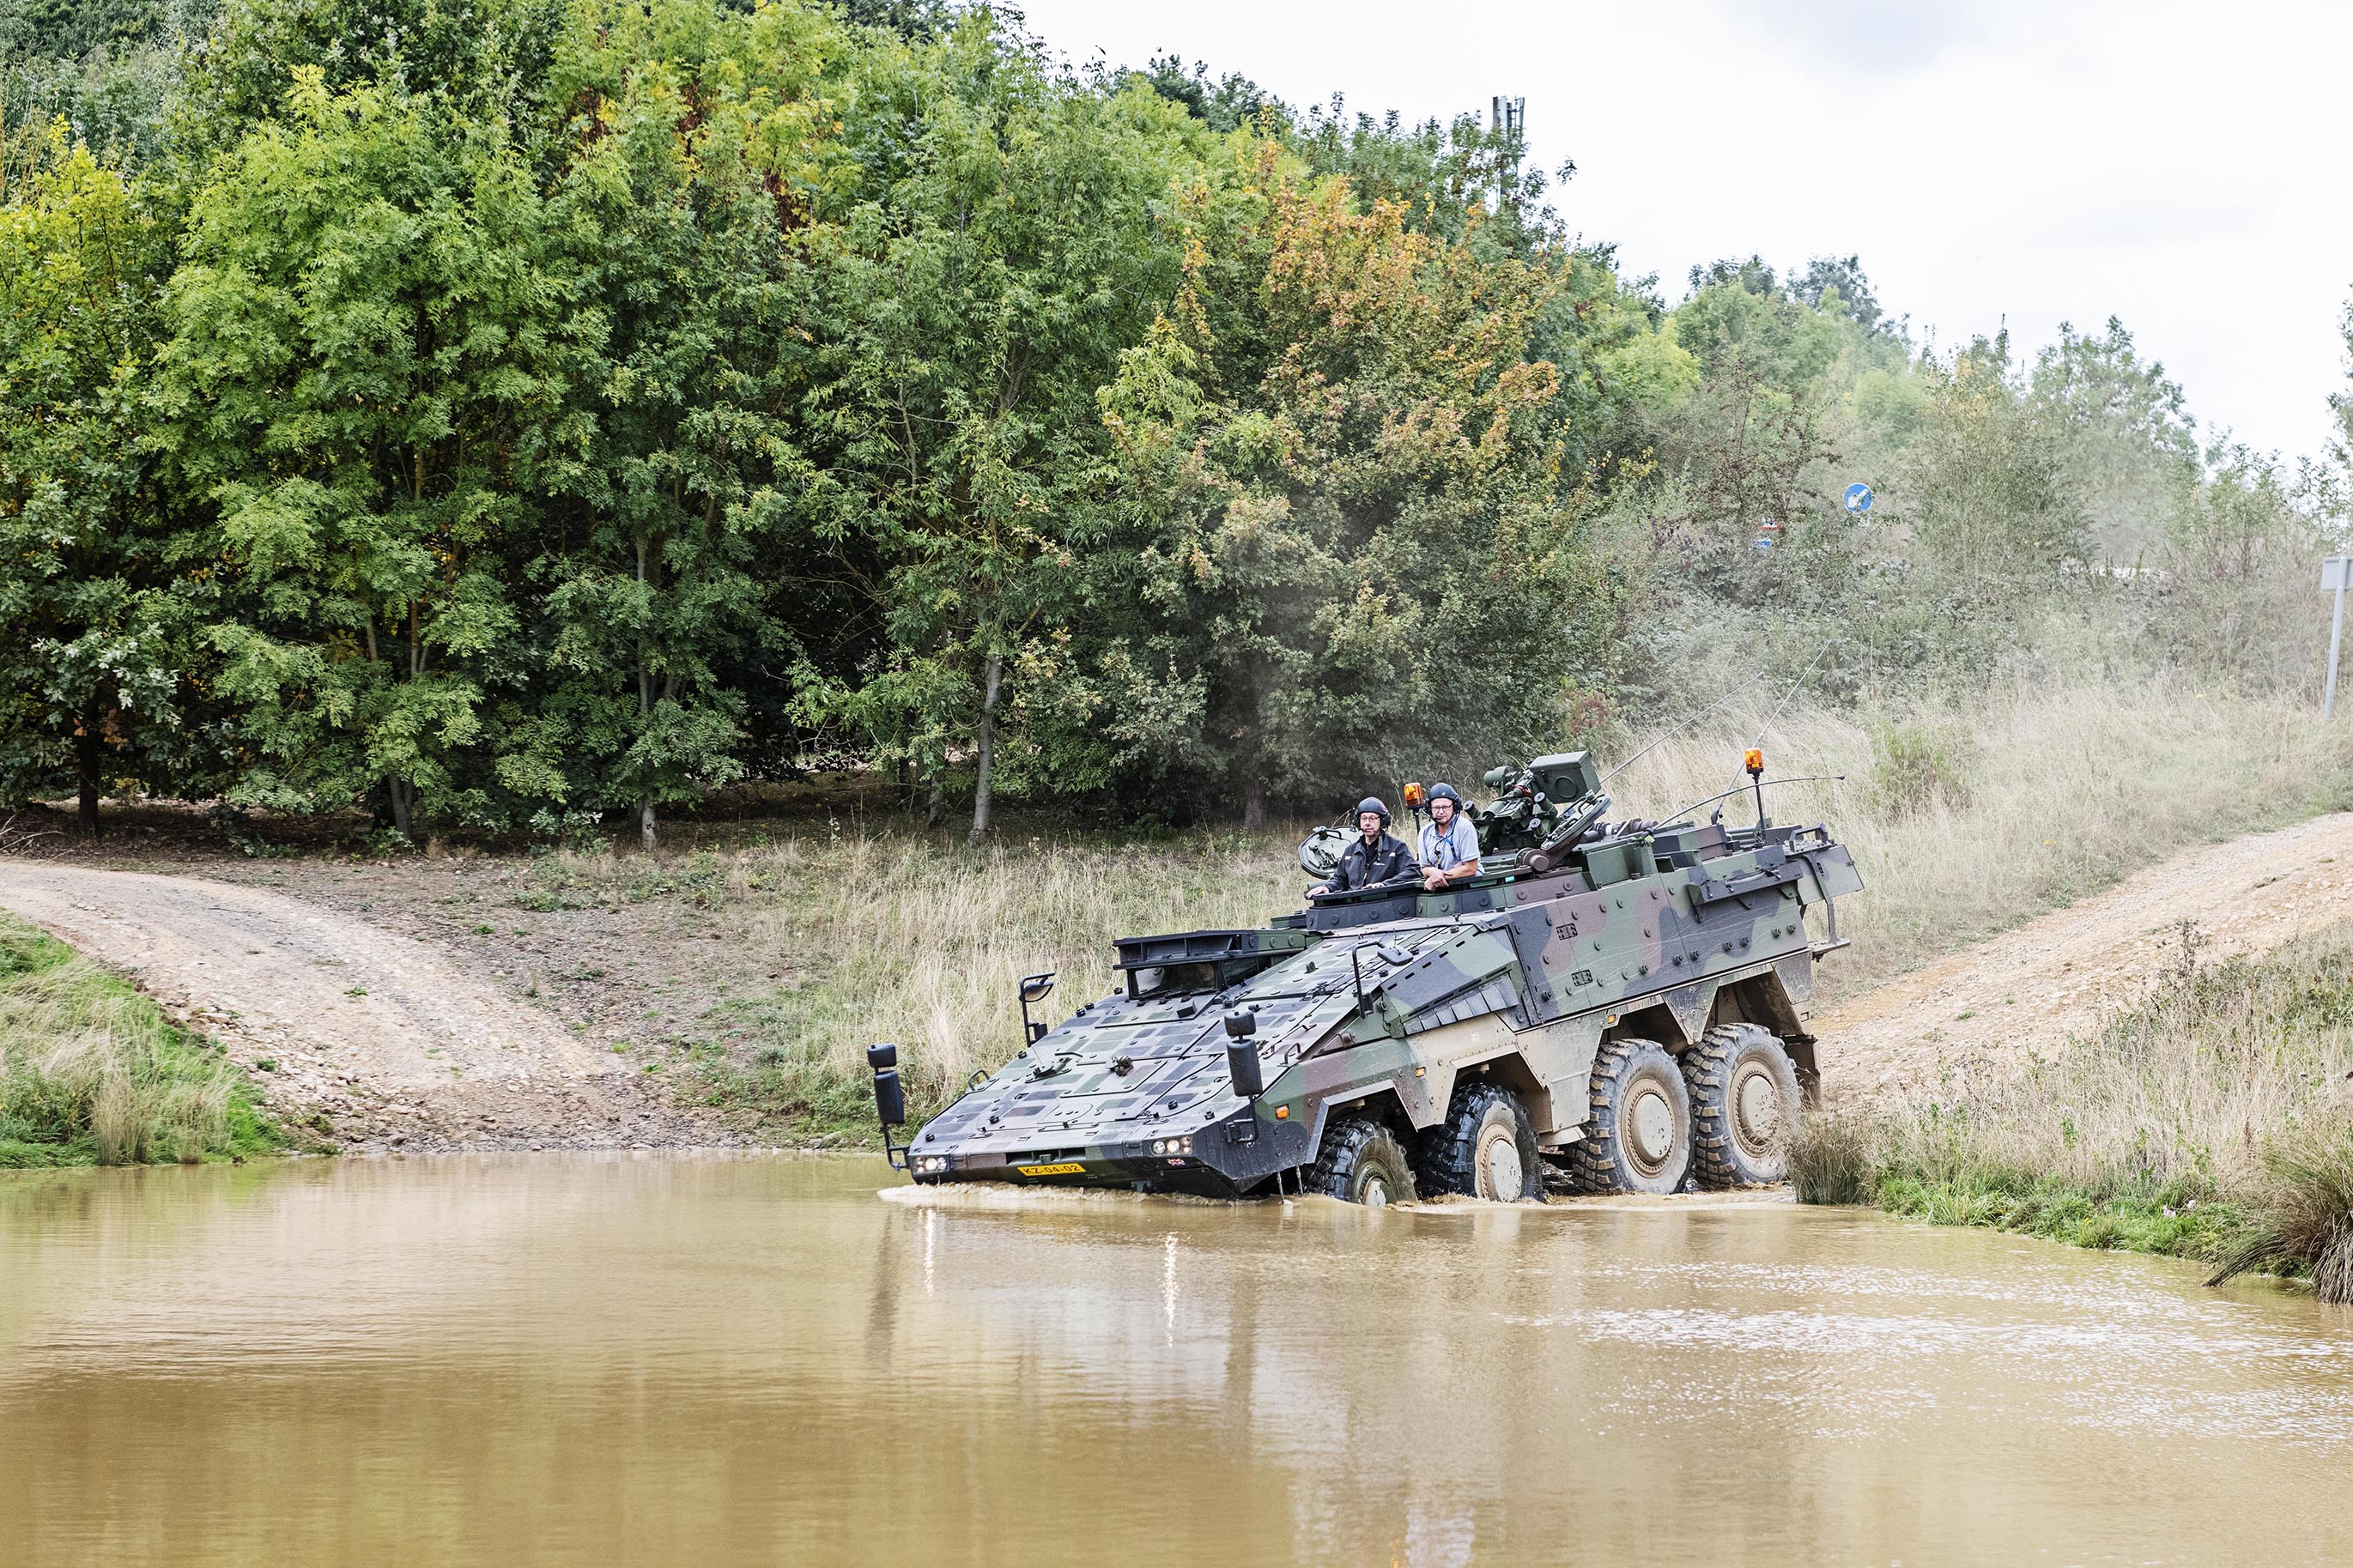 A heavily-armoured, camouflaged tank-like vehicle drives down a hill into a muddy lake, with the front wheels already submerged